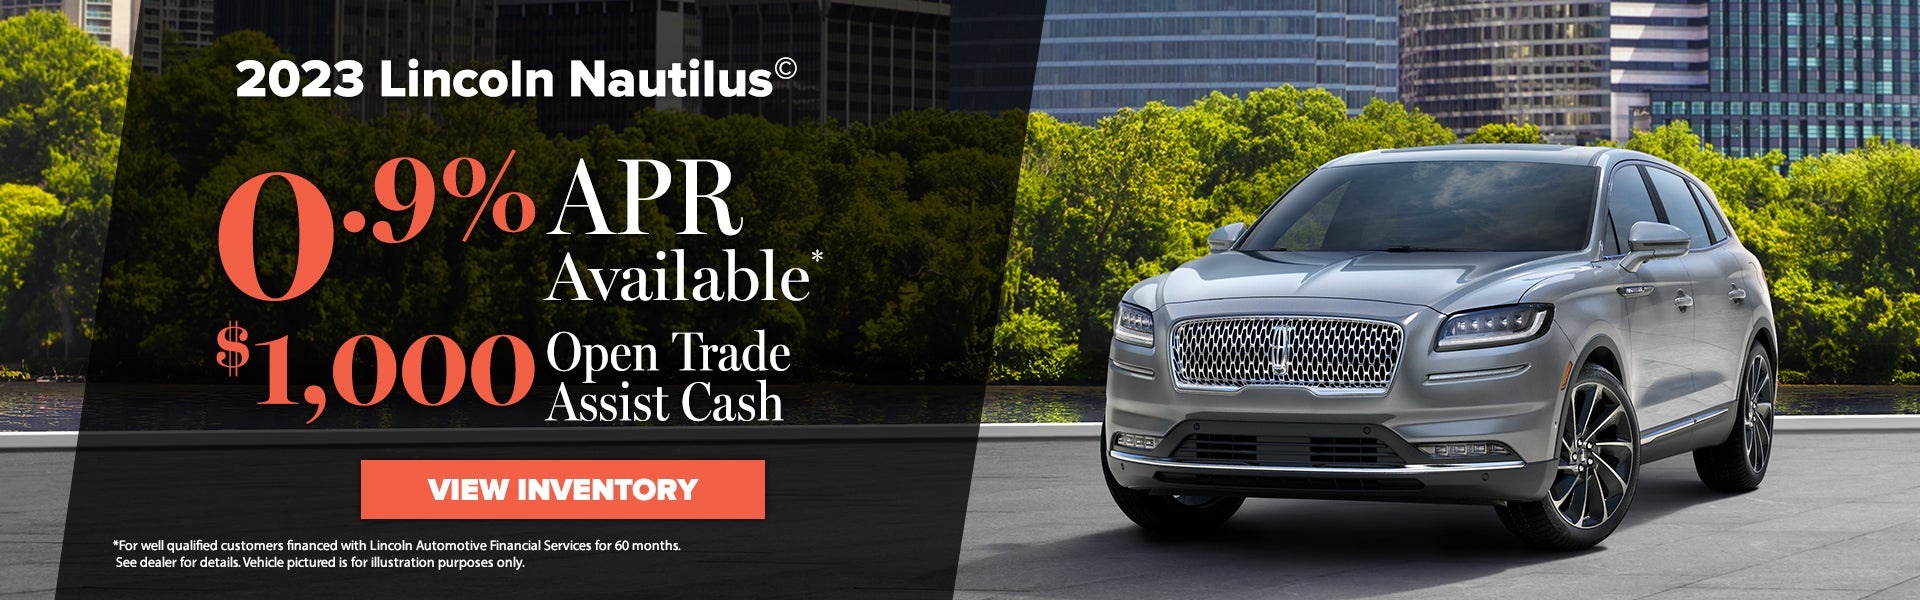 Special APR on 2023 Lincoln Nautilus